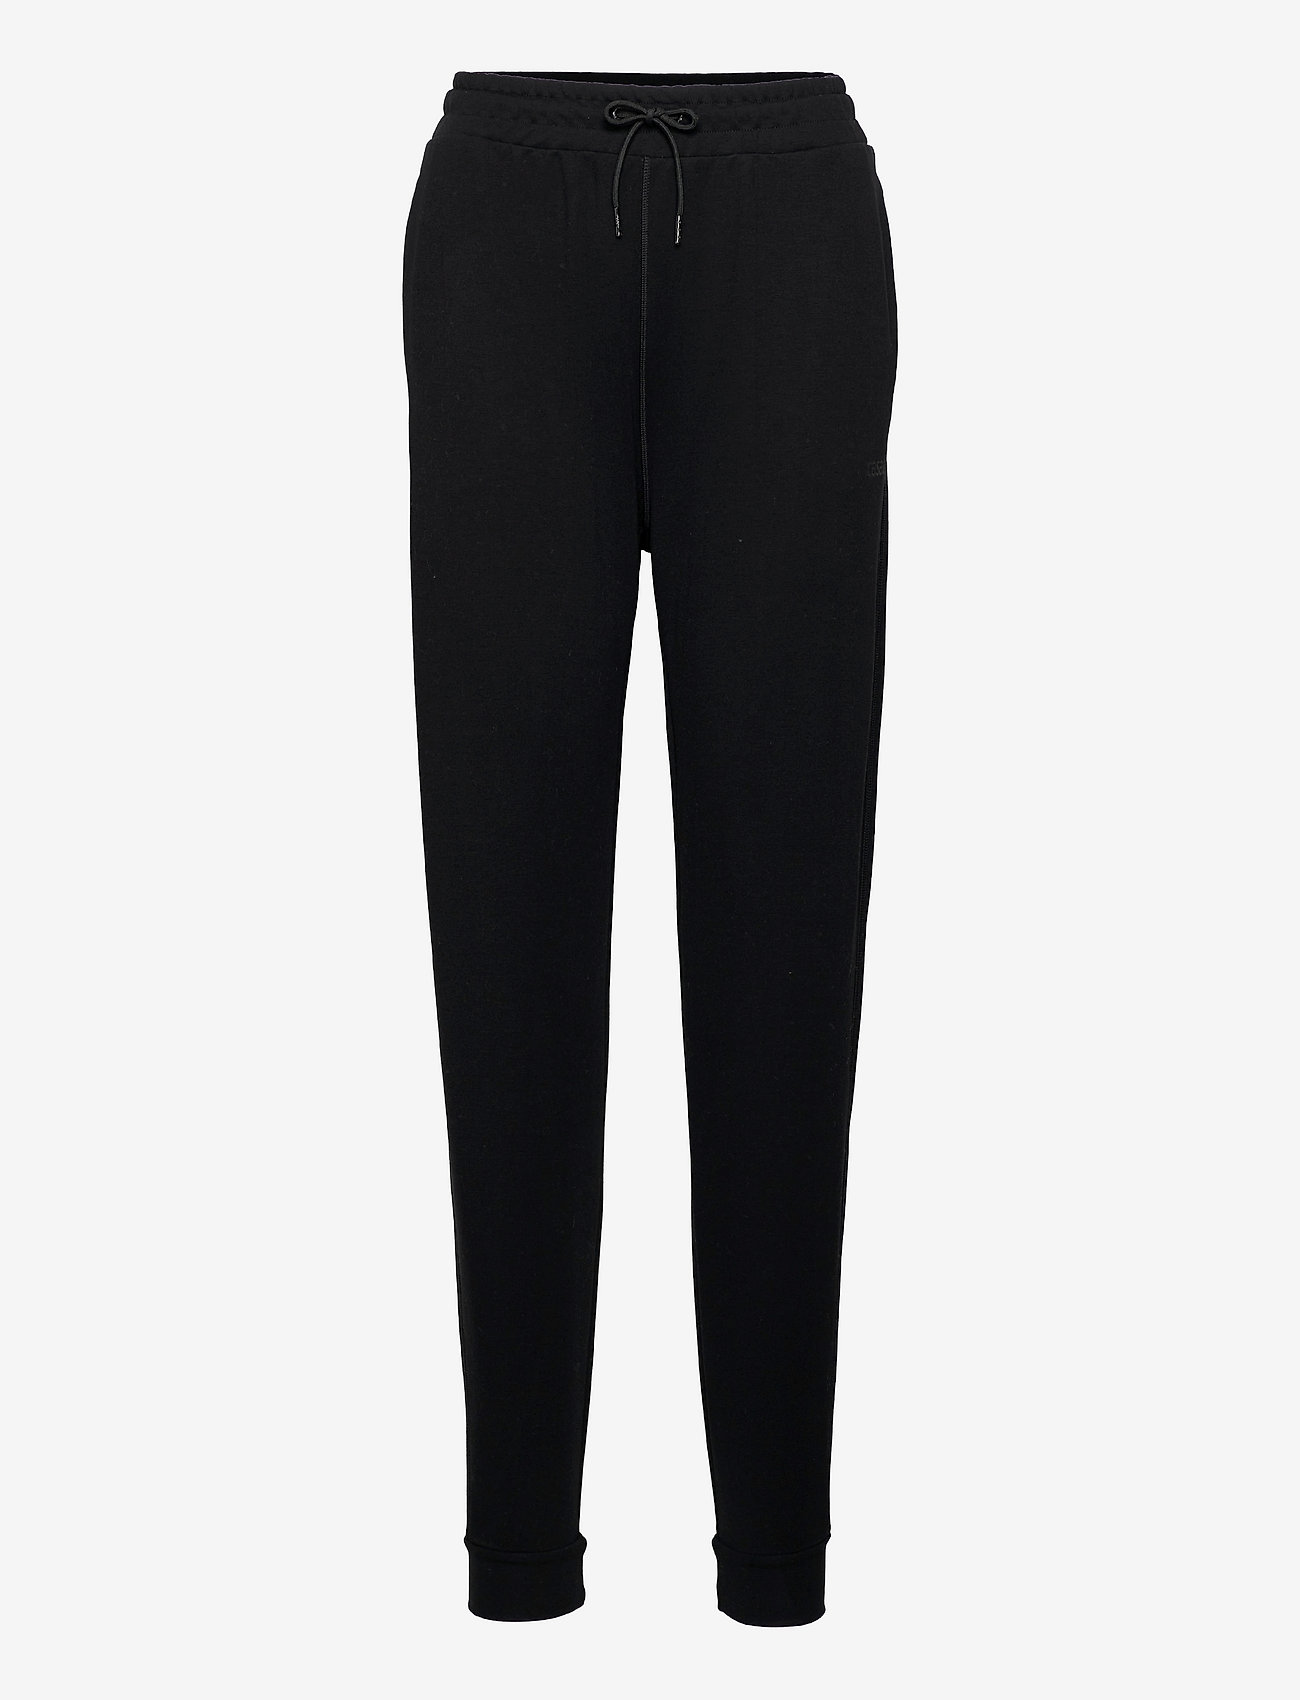 Casall Soft Drapy Pants - Trousers | Boozt.com